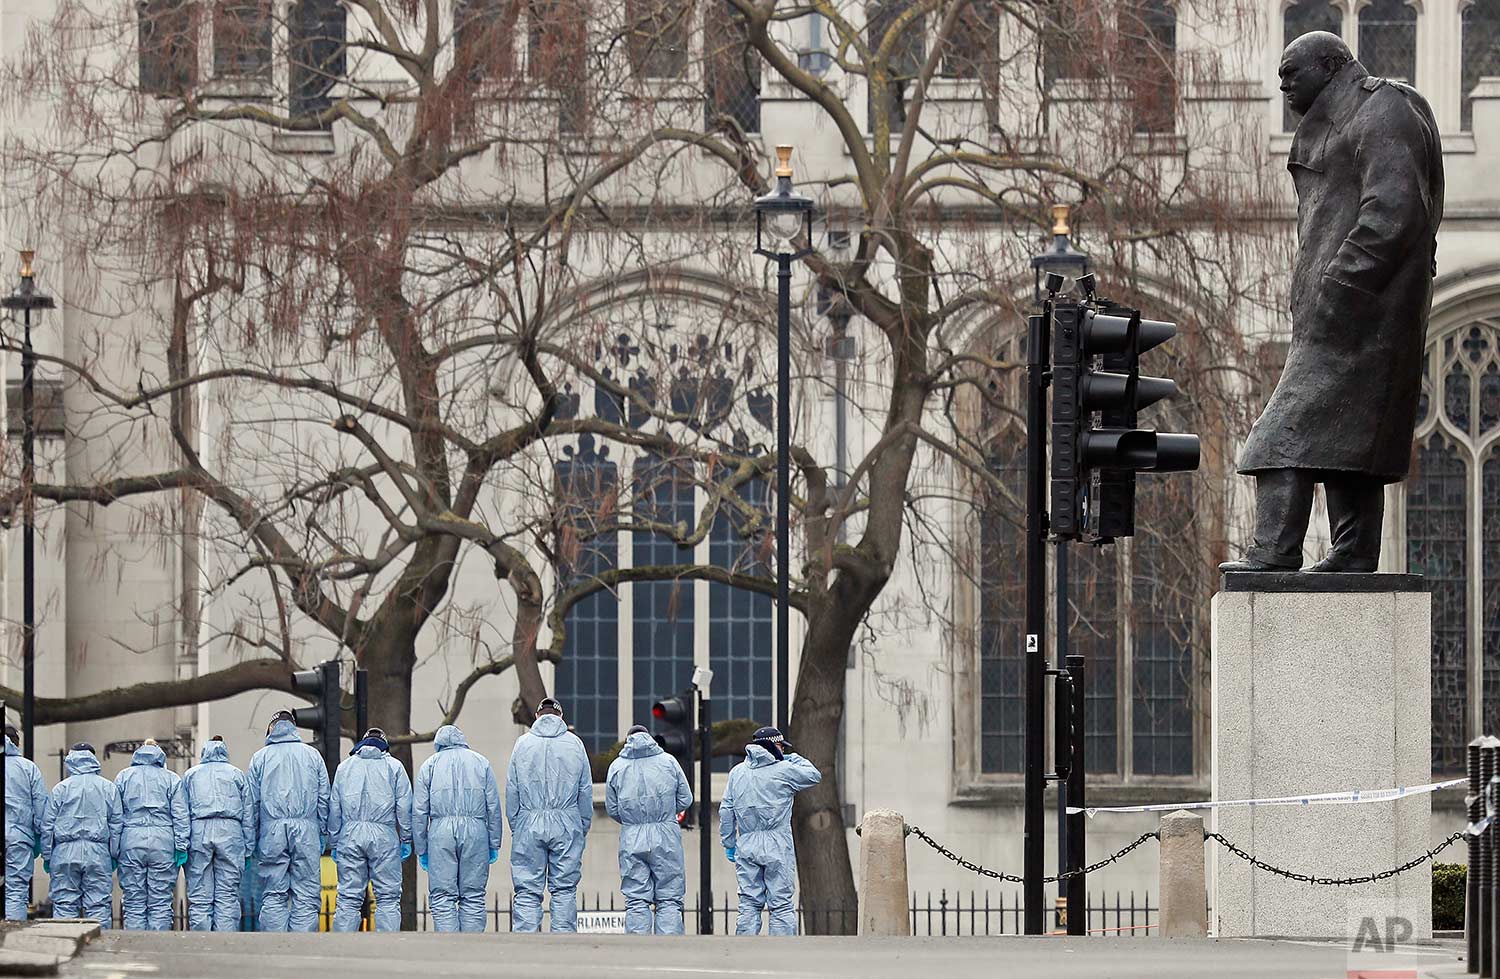  In this Thursday March 23, 2017 photo, police forensic officers work in Parliament Square overseen by the statue of Winston Churchill outside the Houses of Parliament in London. On Wednesday a knife-wielding man went on a deadly rampage, first drivi